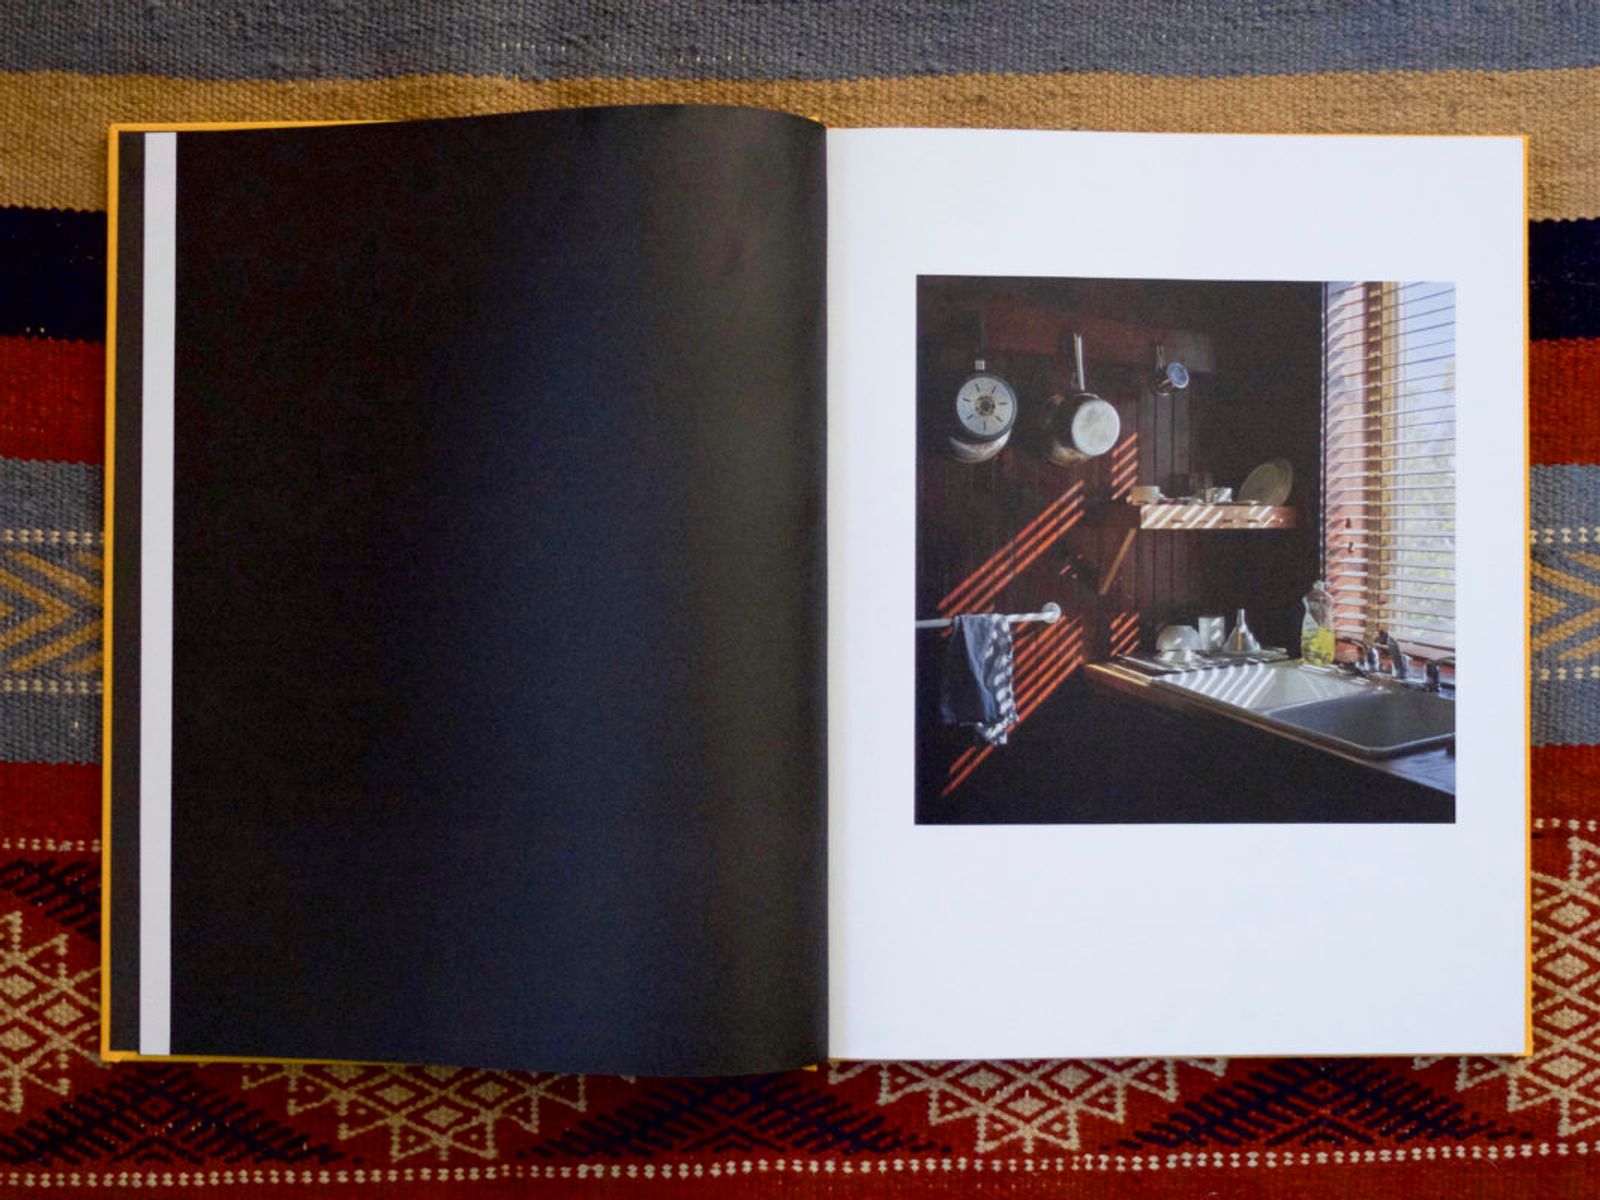 © Leporello Books - Image from the PICTURE SUMMER ON KODAK FILM by Jason Fulford photography project